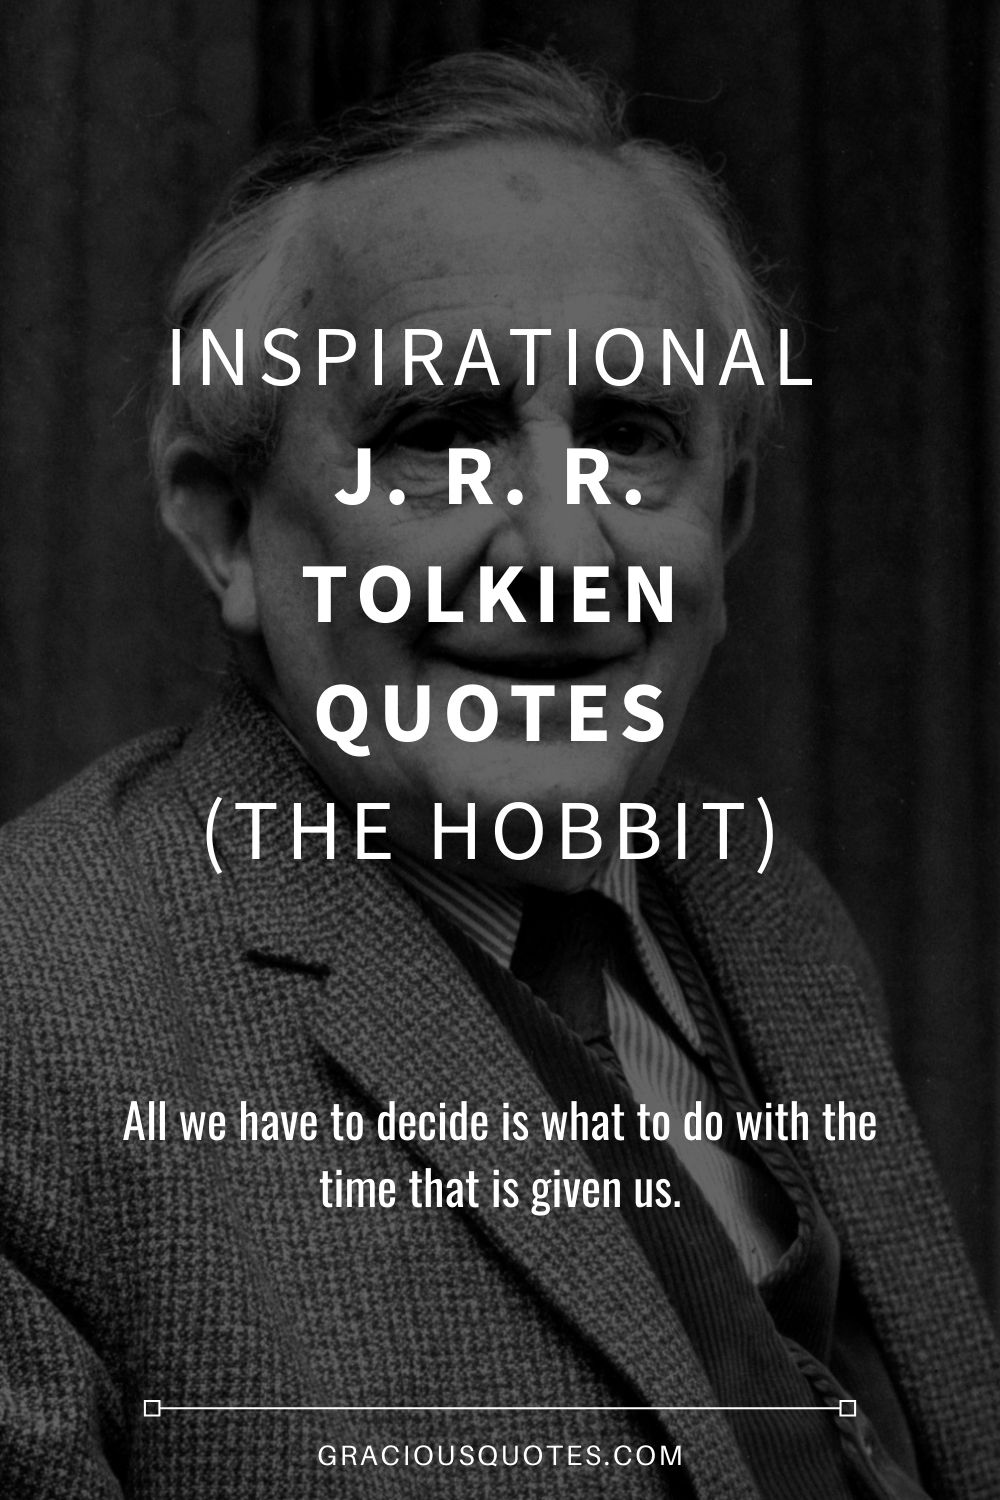 Inspirational J. R. R. Tolkien Quotes (THE HOBBIT) - Gracious Quotes